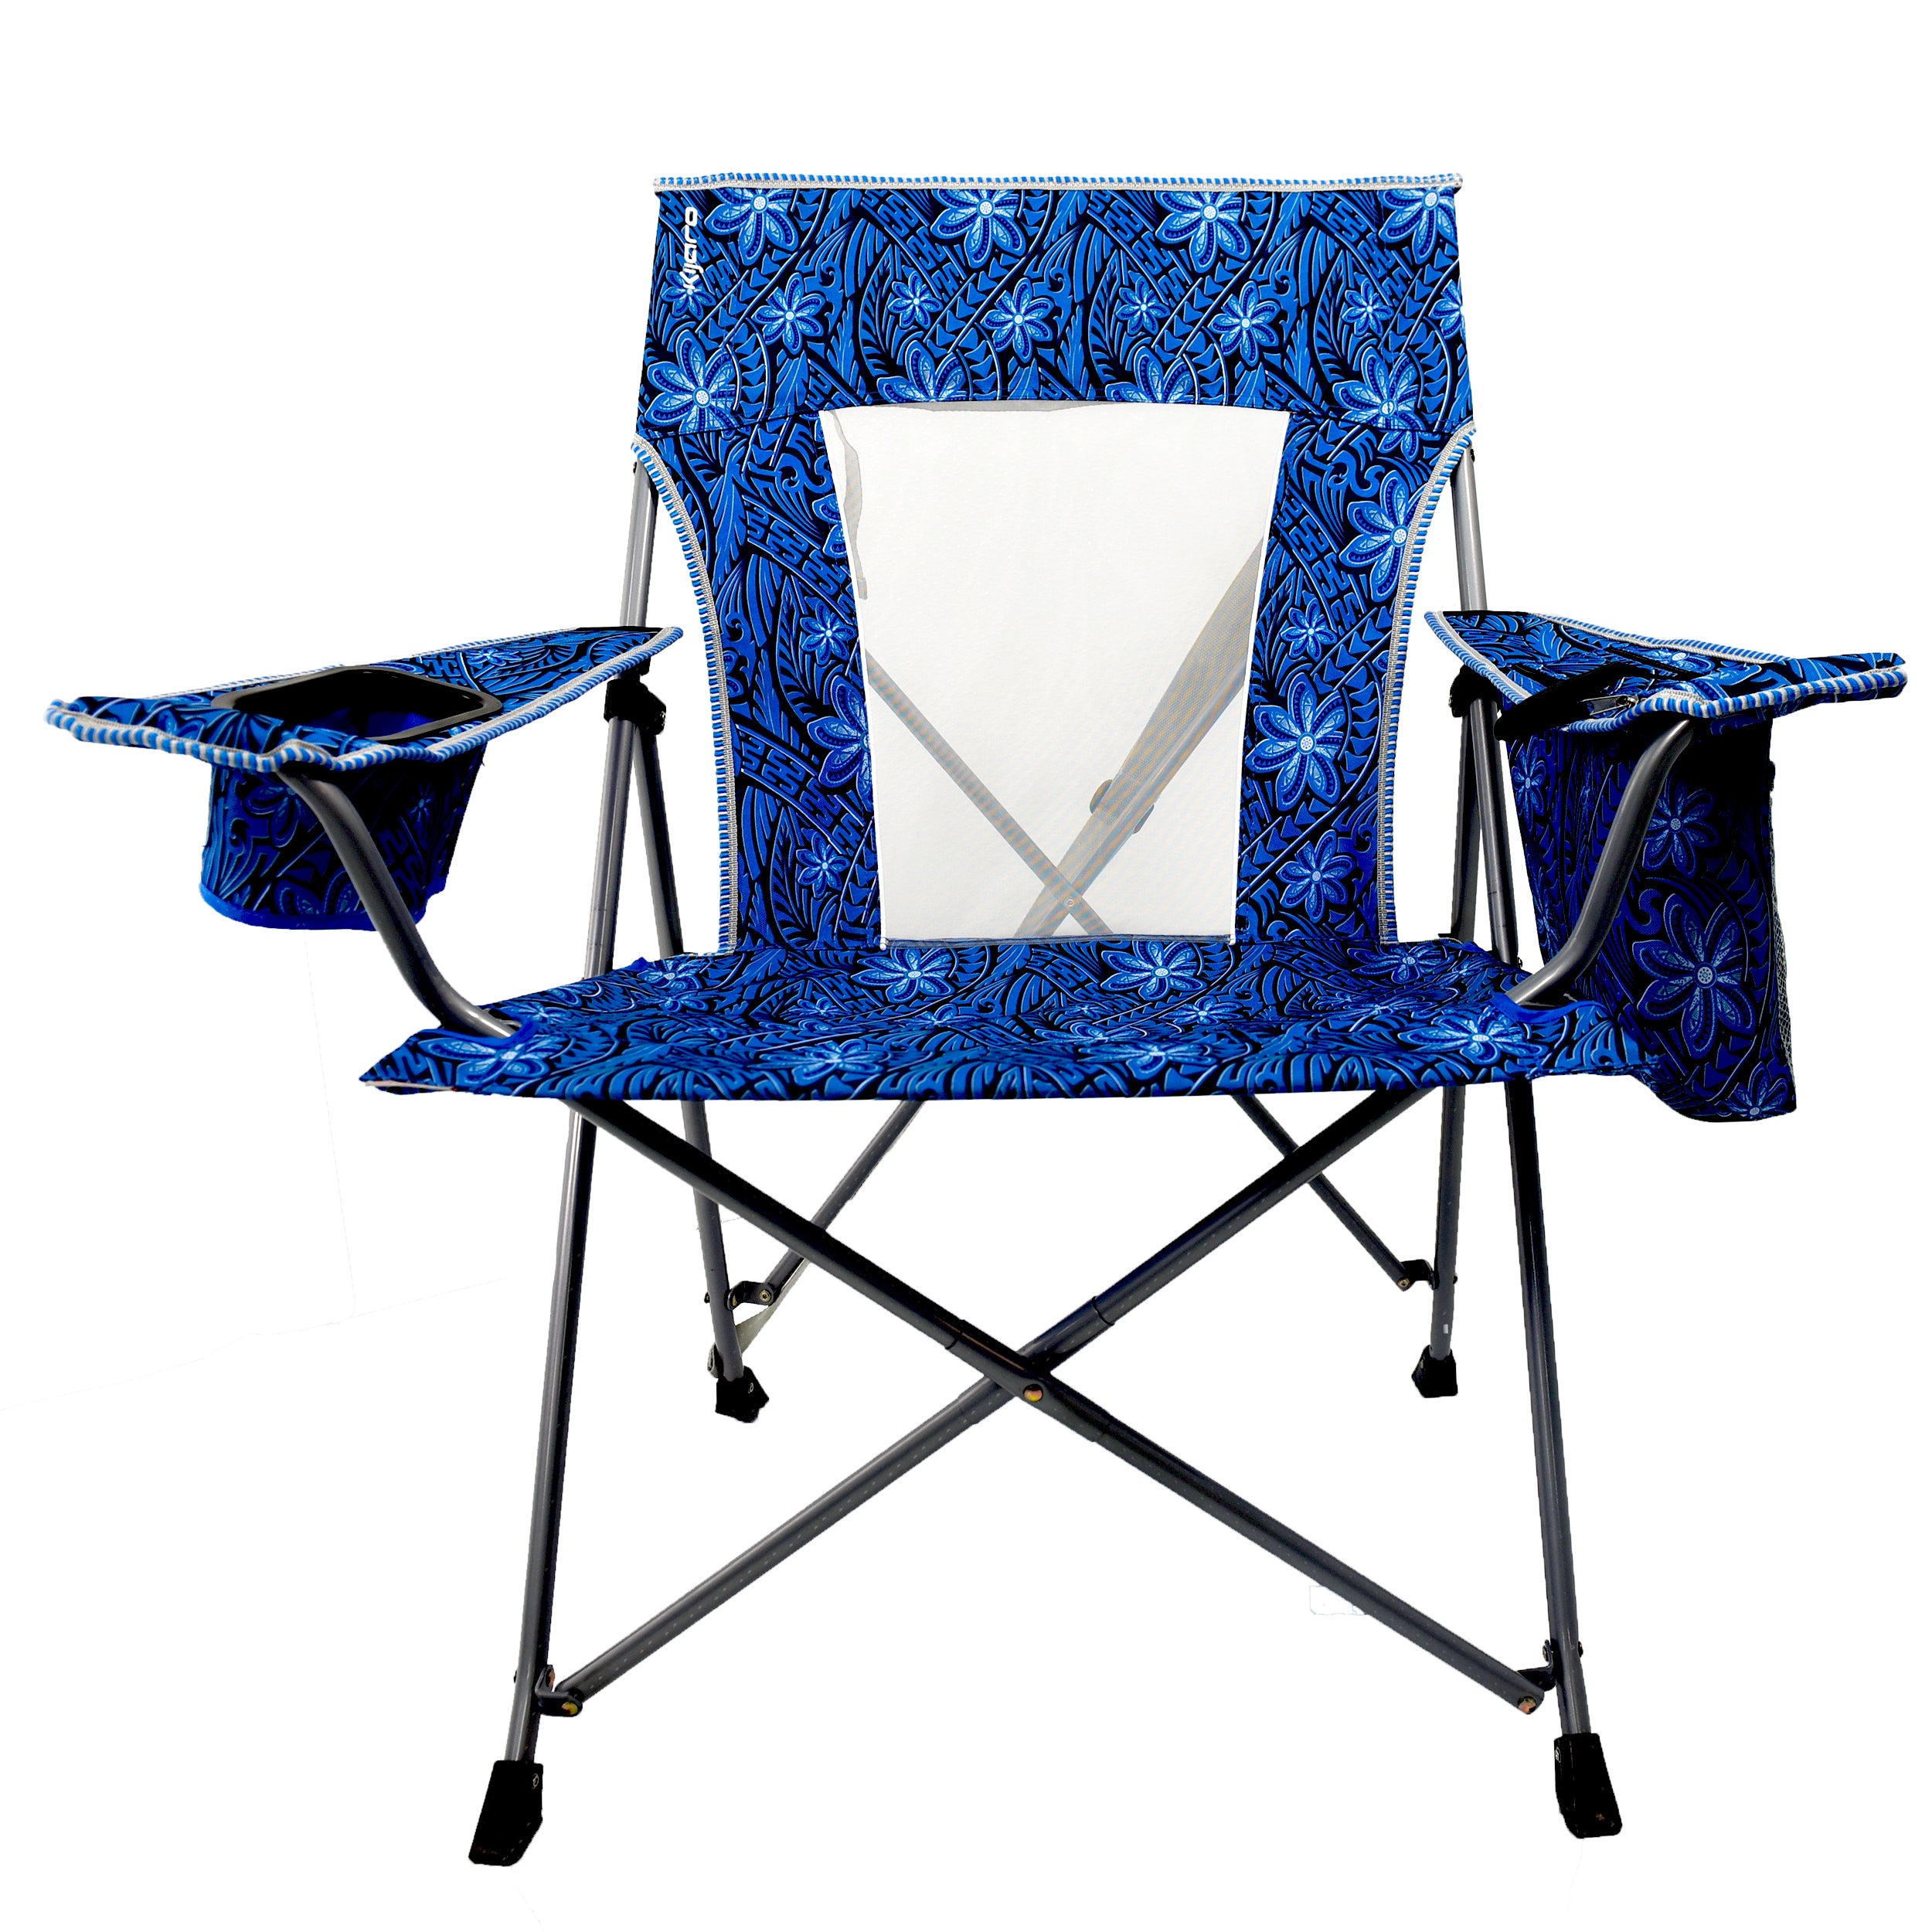 Journey Print Beach Chair - FREE Hammock with Purchase